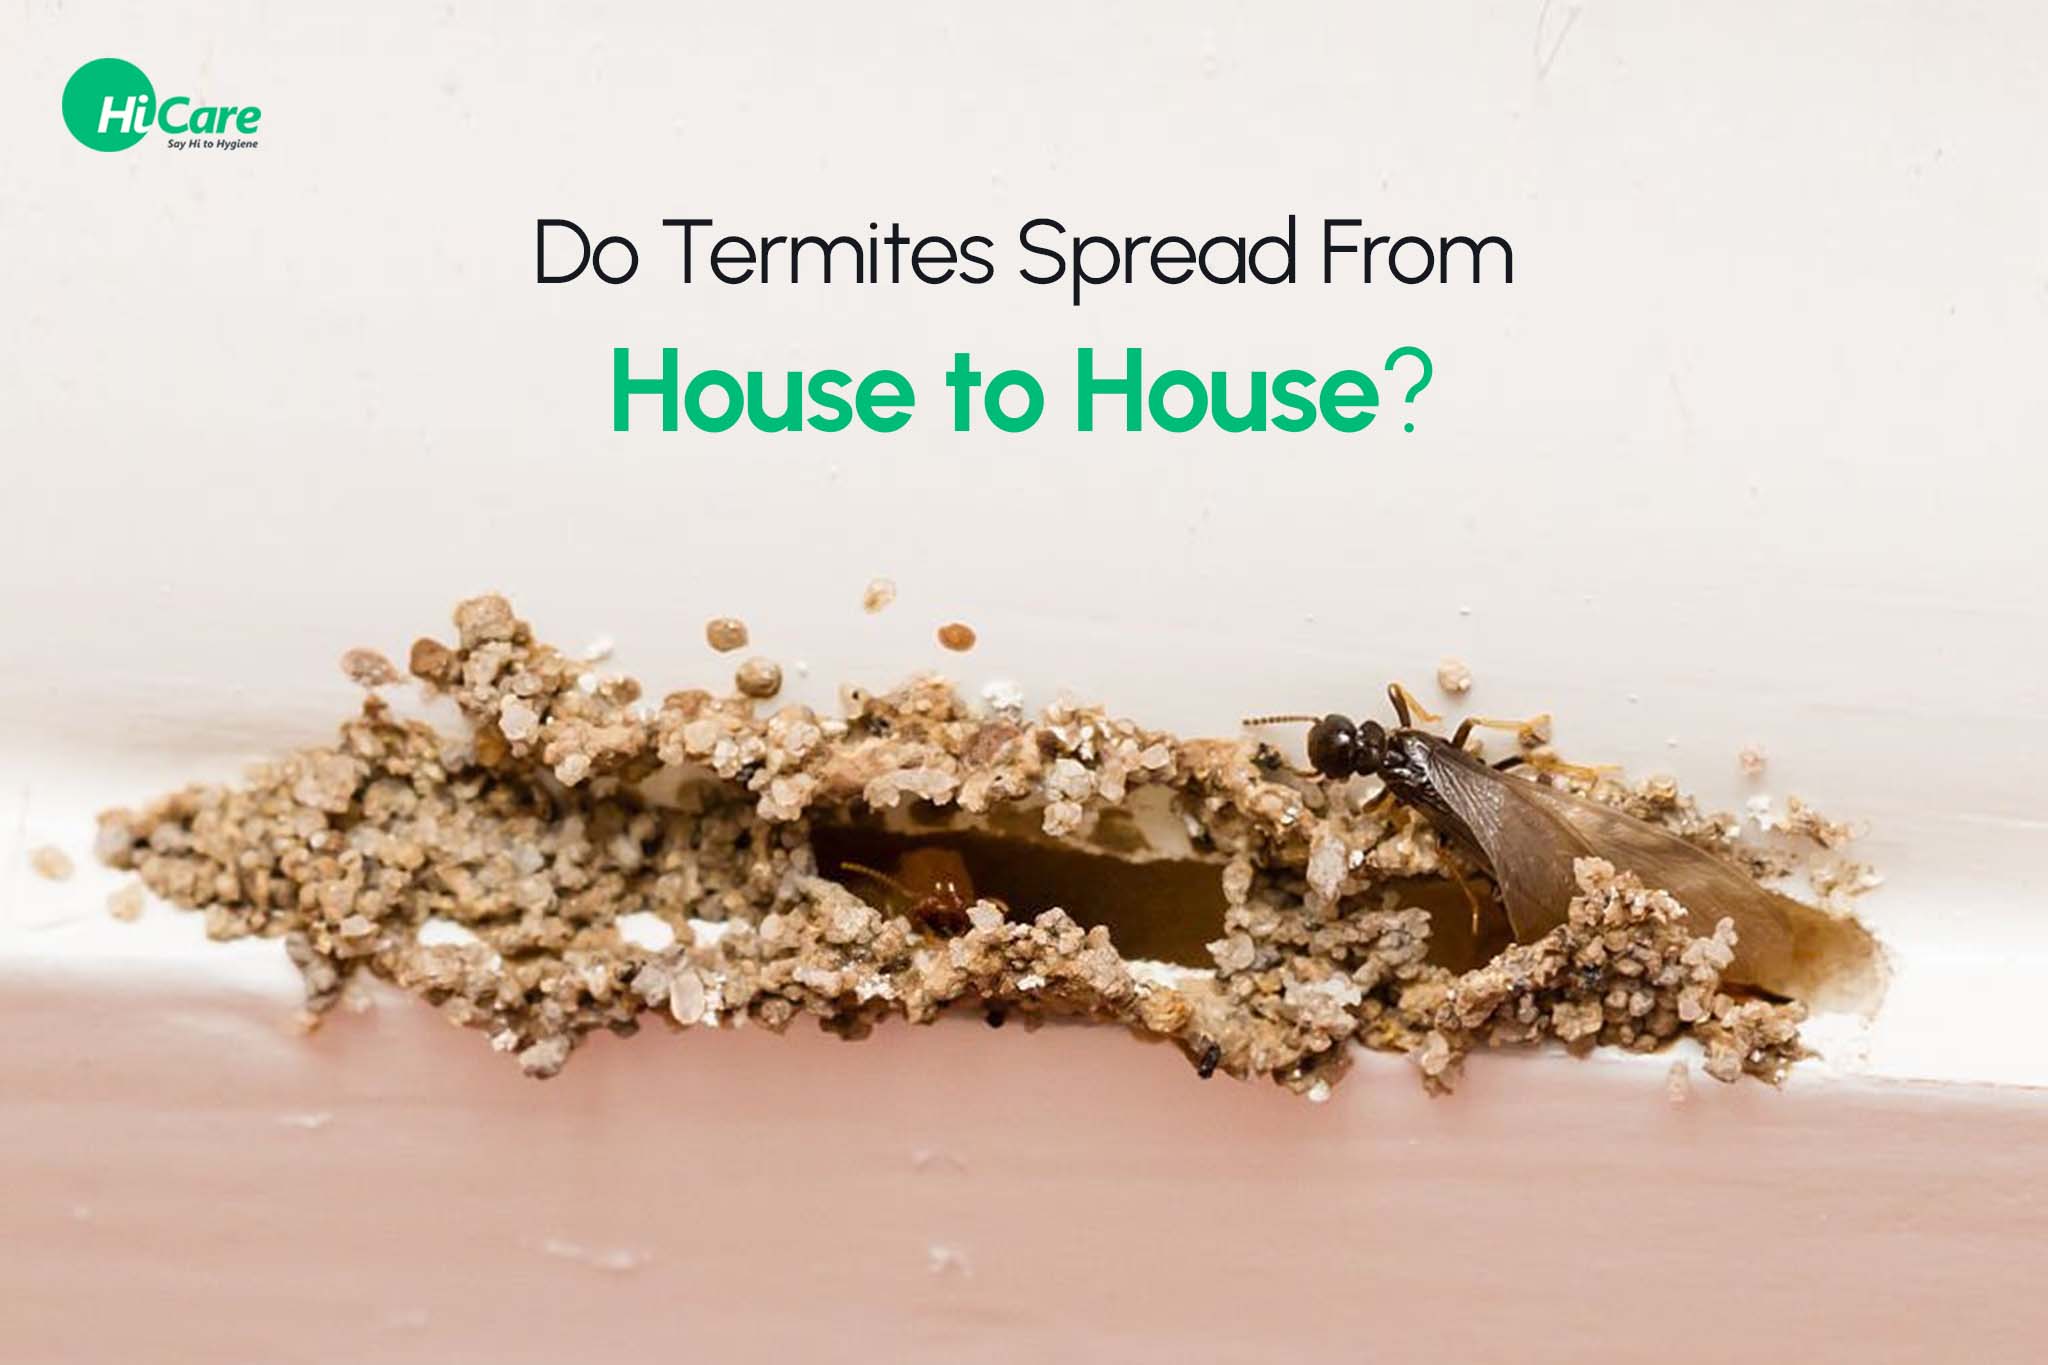 Do Termites Spread from House to House?